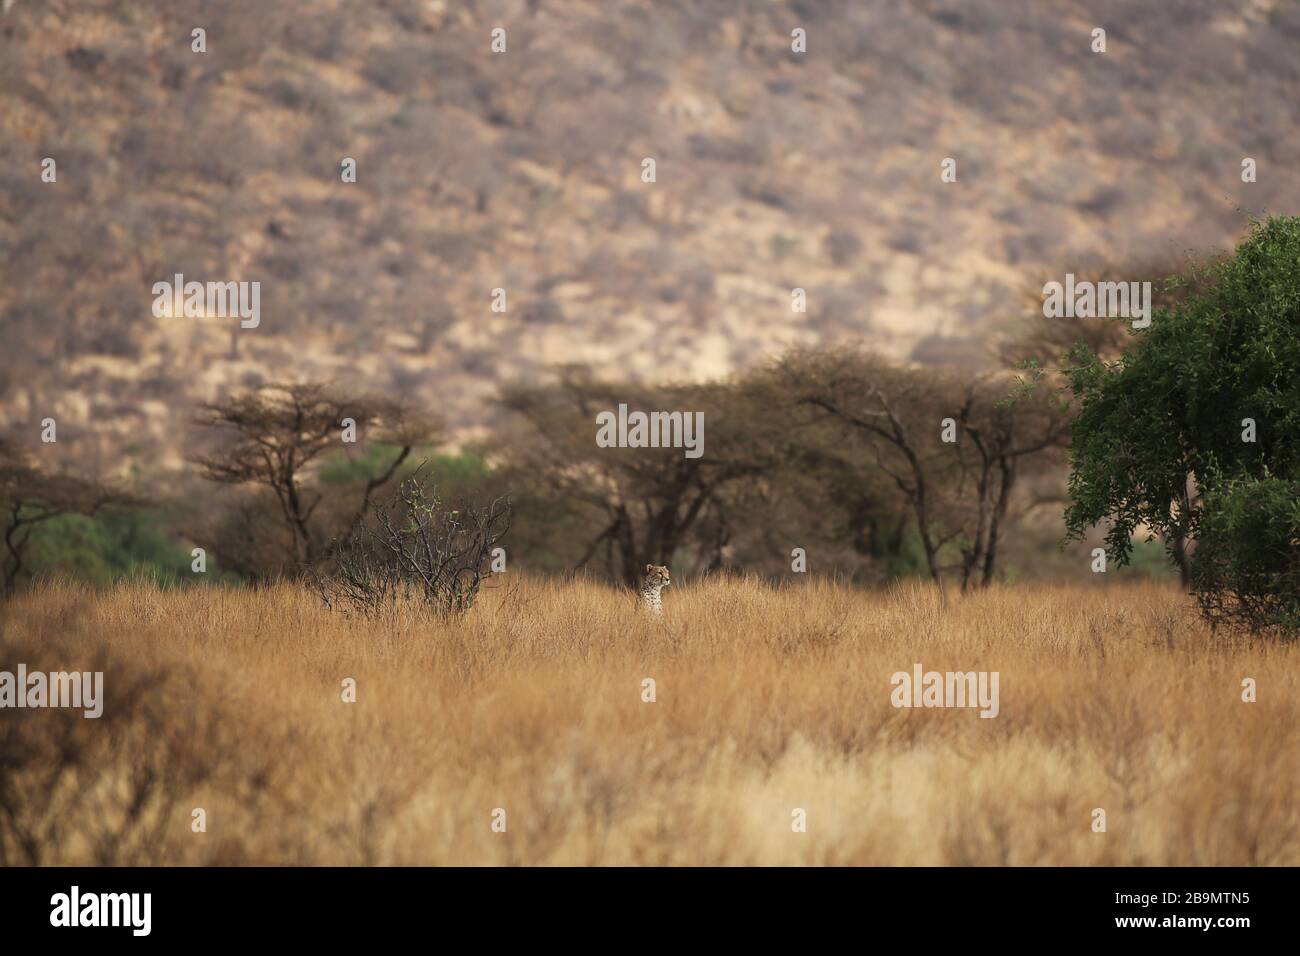 A cheetah scans its surroundings in the middle of tall dry grass. Samburu National Reserve, Kenya. Stock Photo